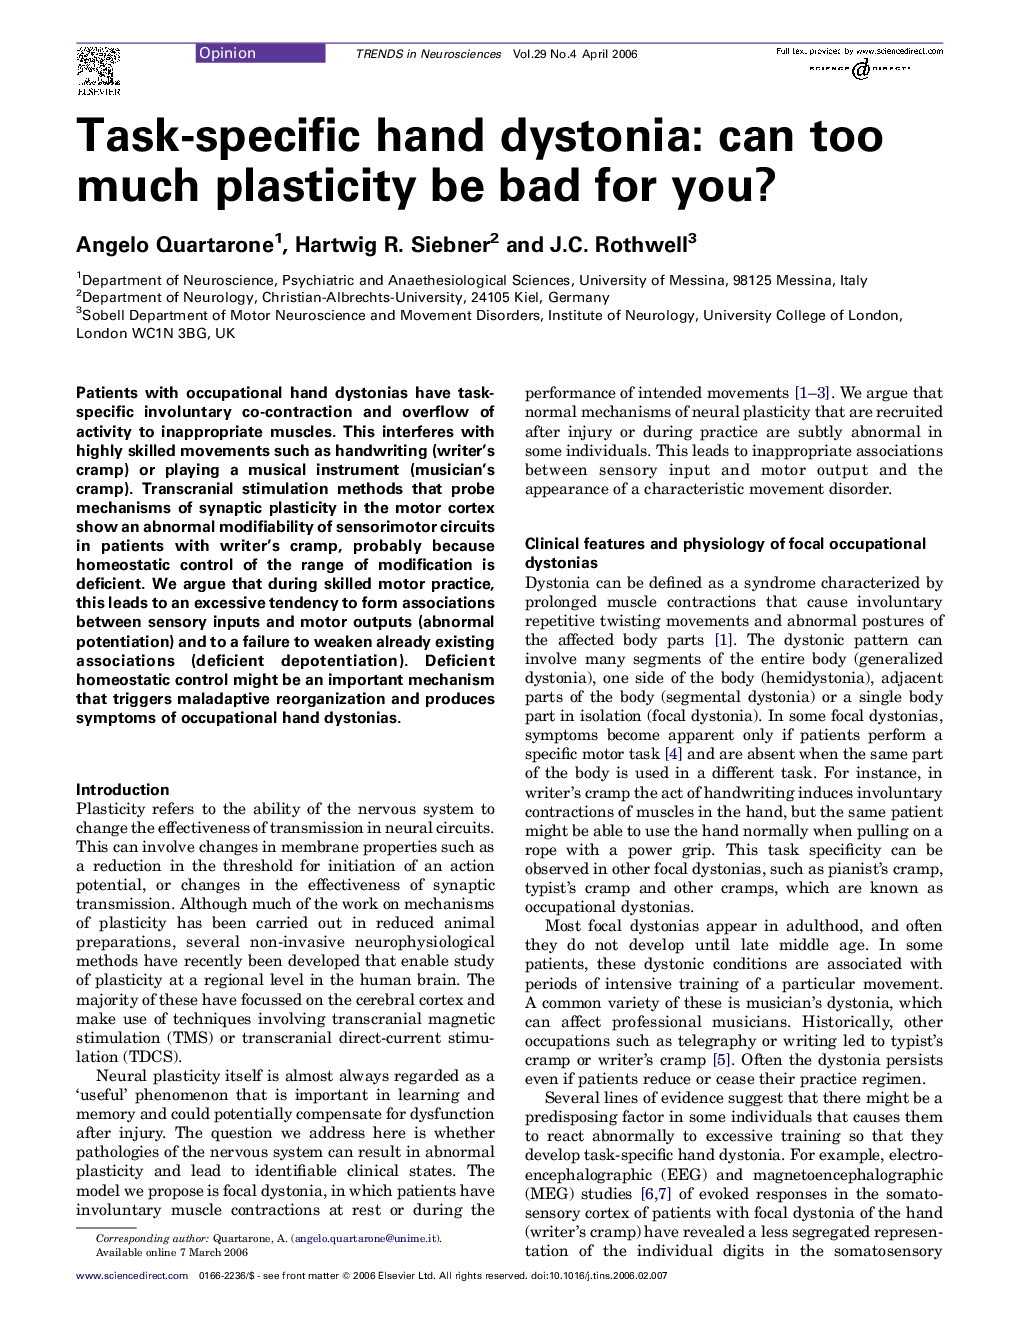 Task-specific hand dystonia: can too much plasticity be bad for you?